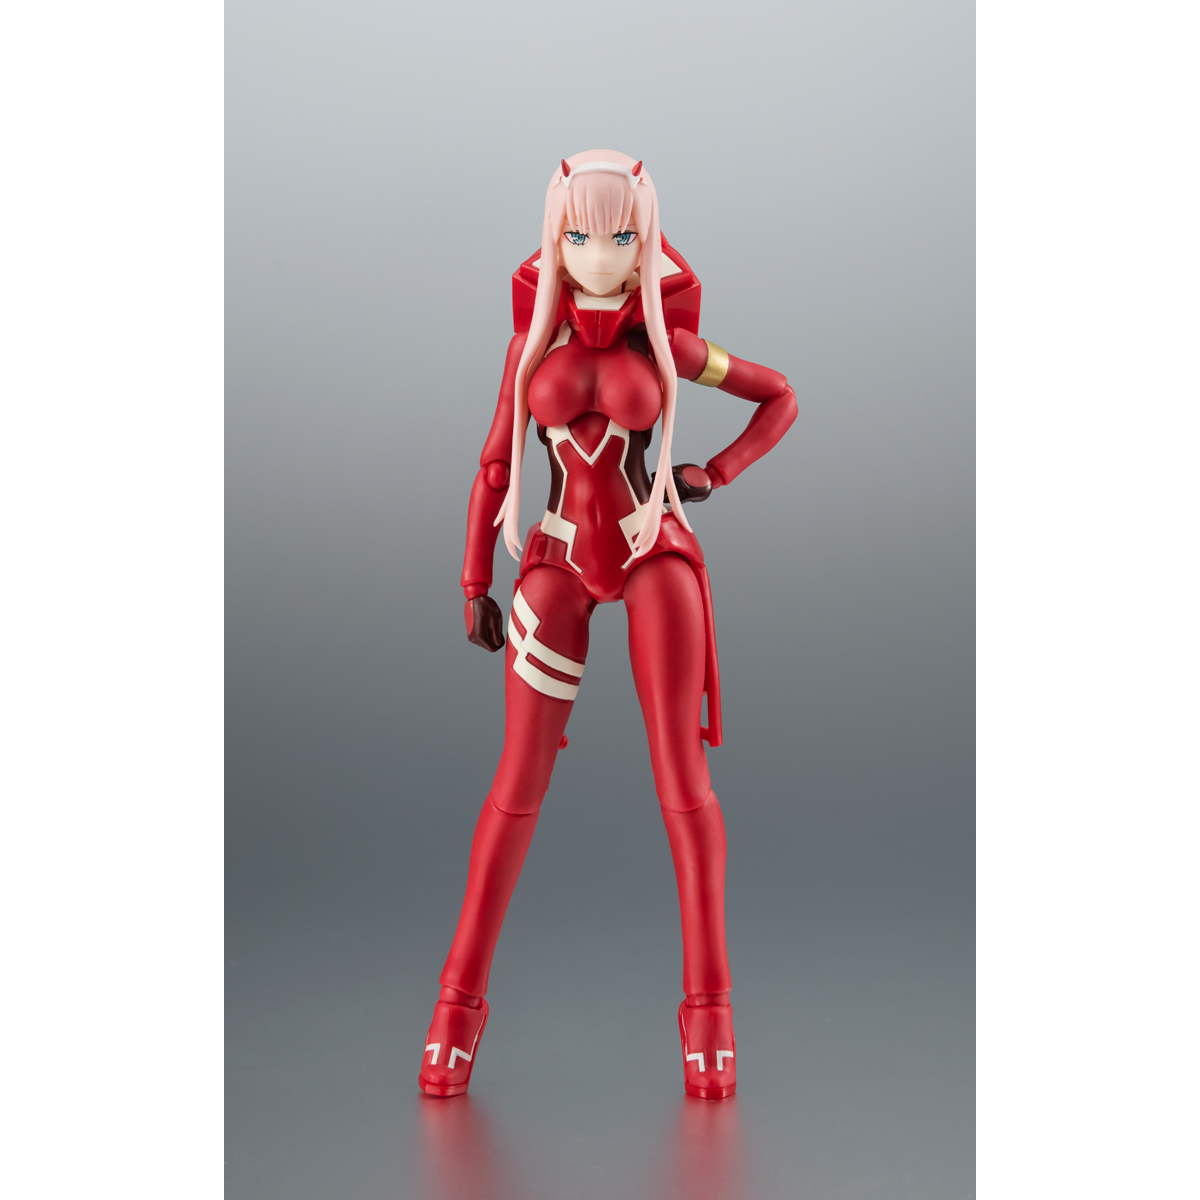 S.H.Figuarts×THE ROBOT SPIRITS DARLING in the FRANXX 5th ANNIVERSARY SET